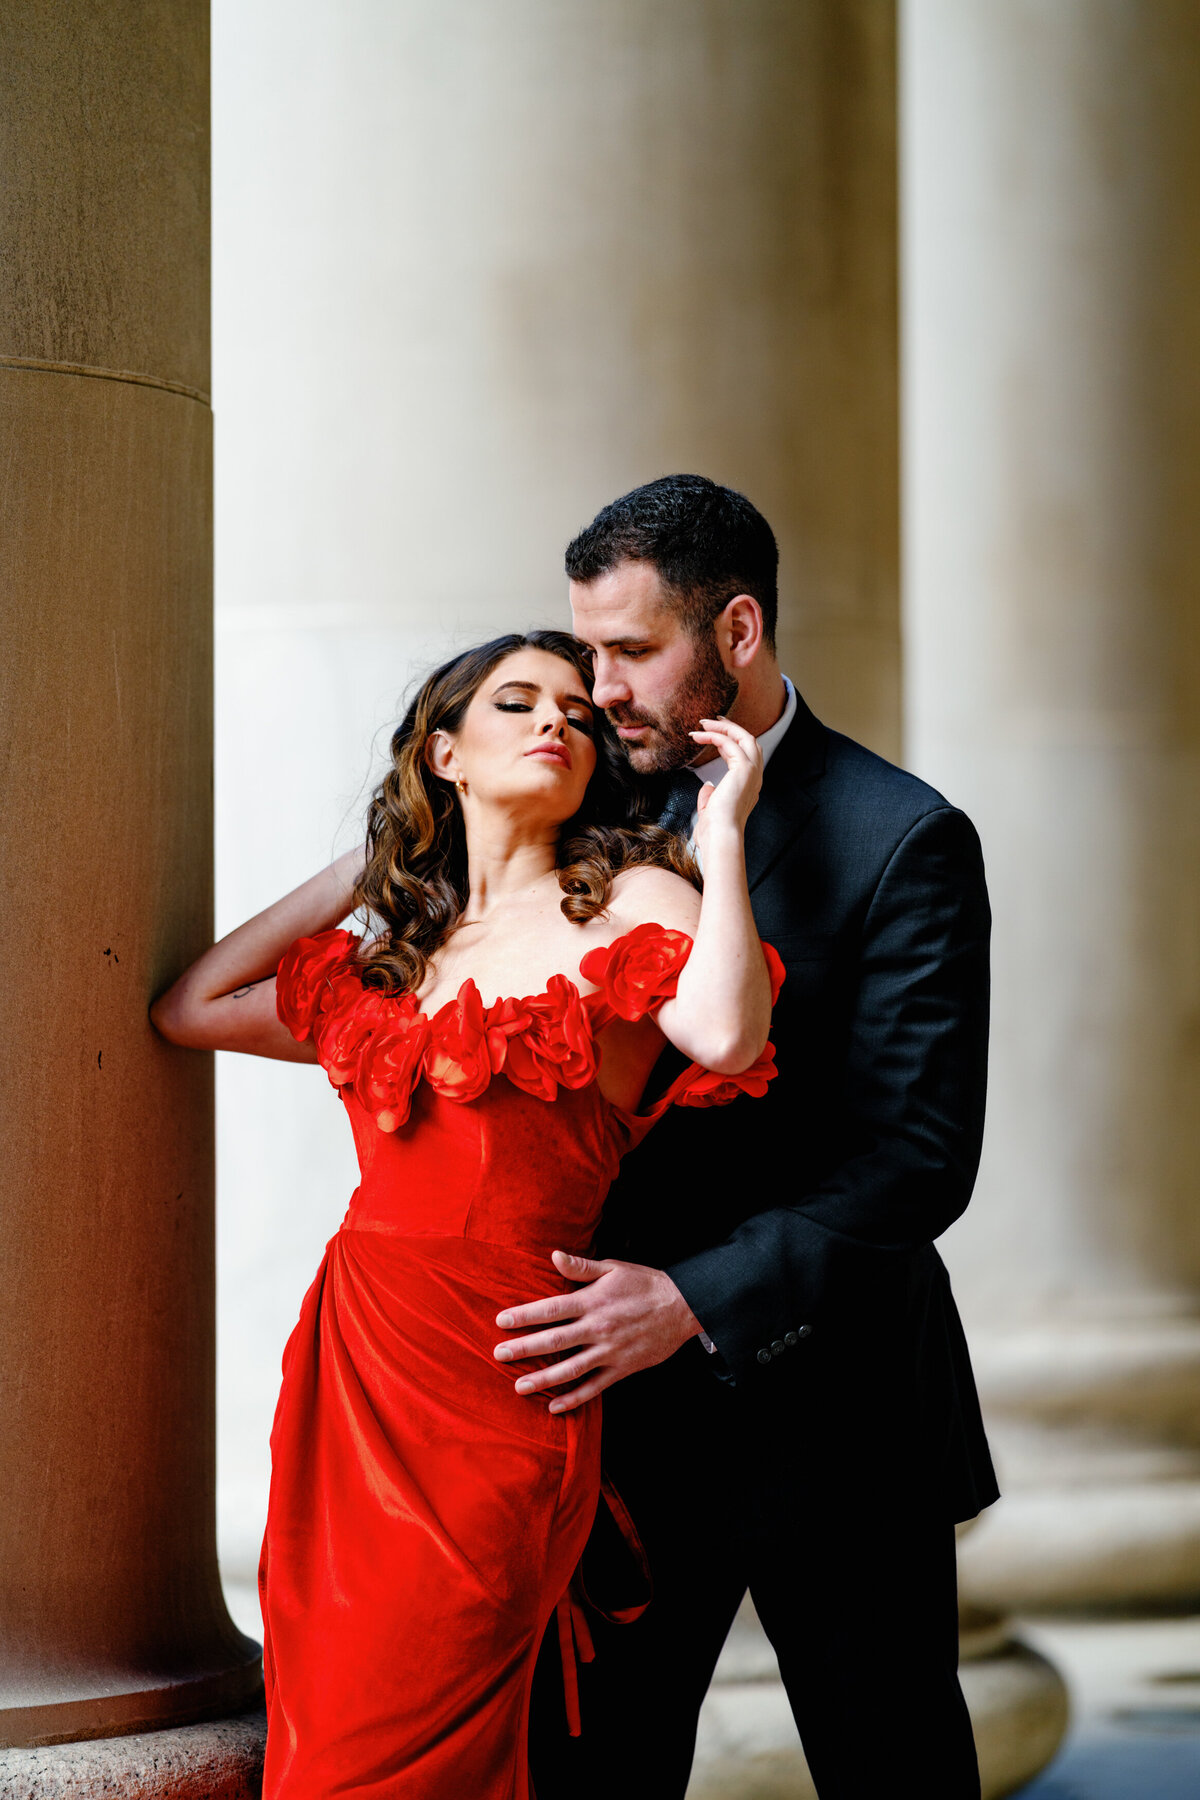 Aspen-Avenue-Chicago-Wedding-Photographer-Union-Station-Chicago-Theater-Engagement-Session-Timeless-Romantic-Red-Dress-Editorial-Stemming-From-Love-Bry-Jean-Artistry-The-Bridal-Collective-True-to-color-Luxury-FAV-75